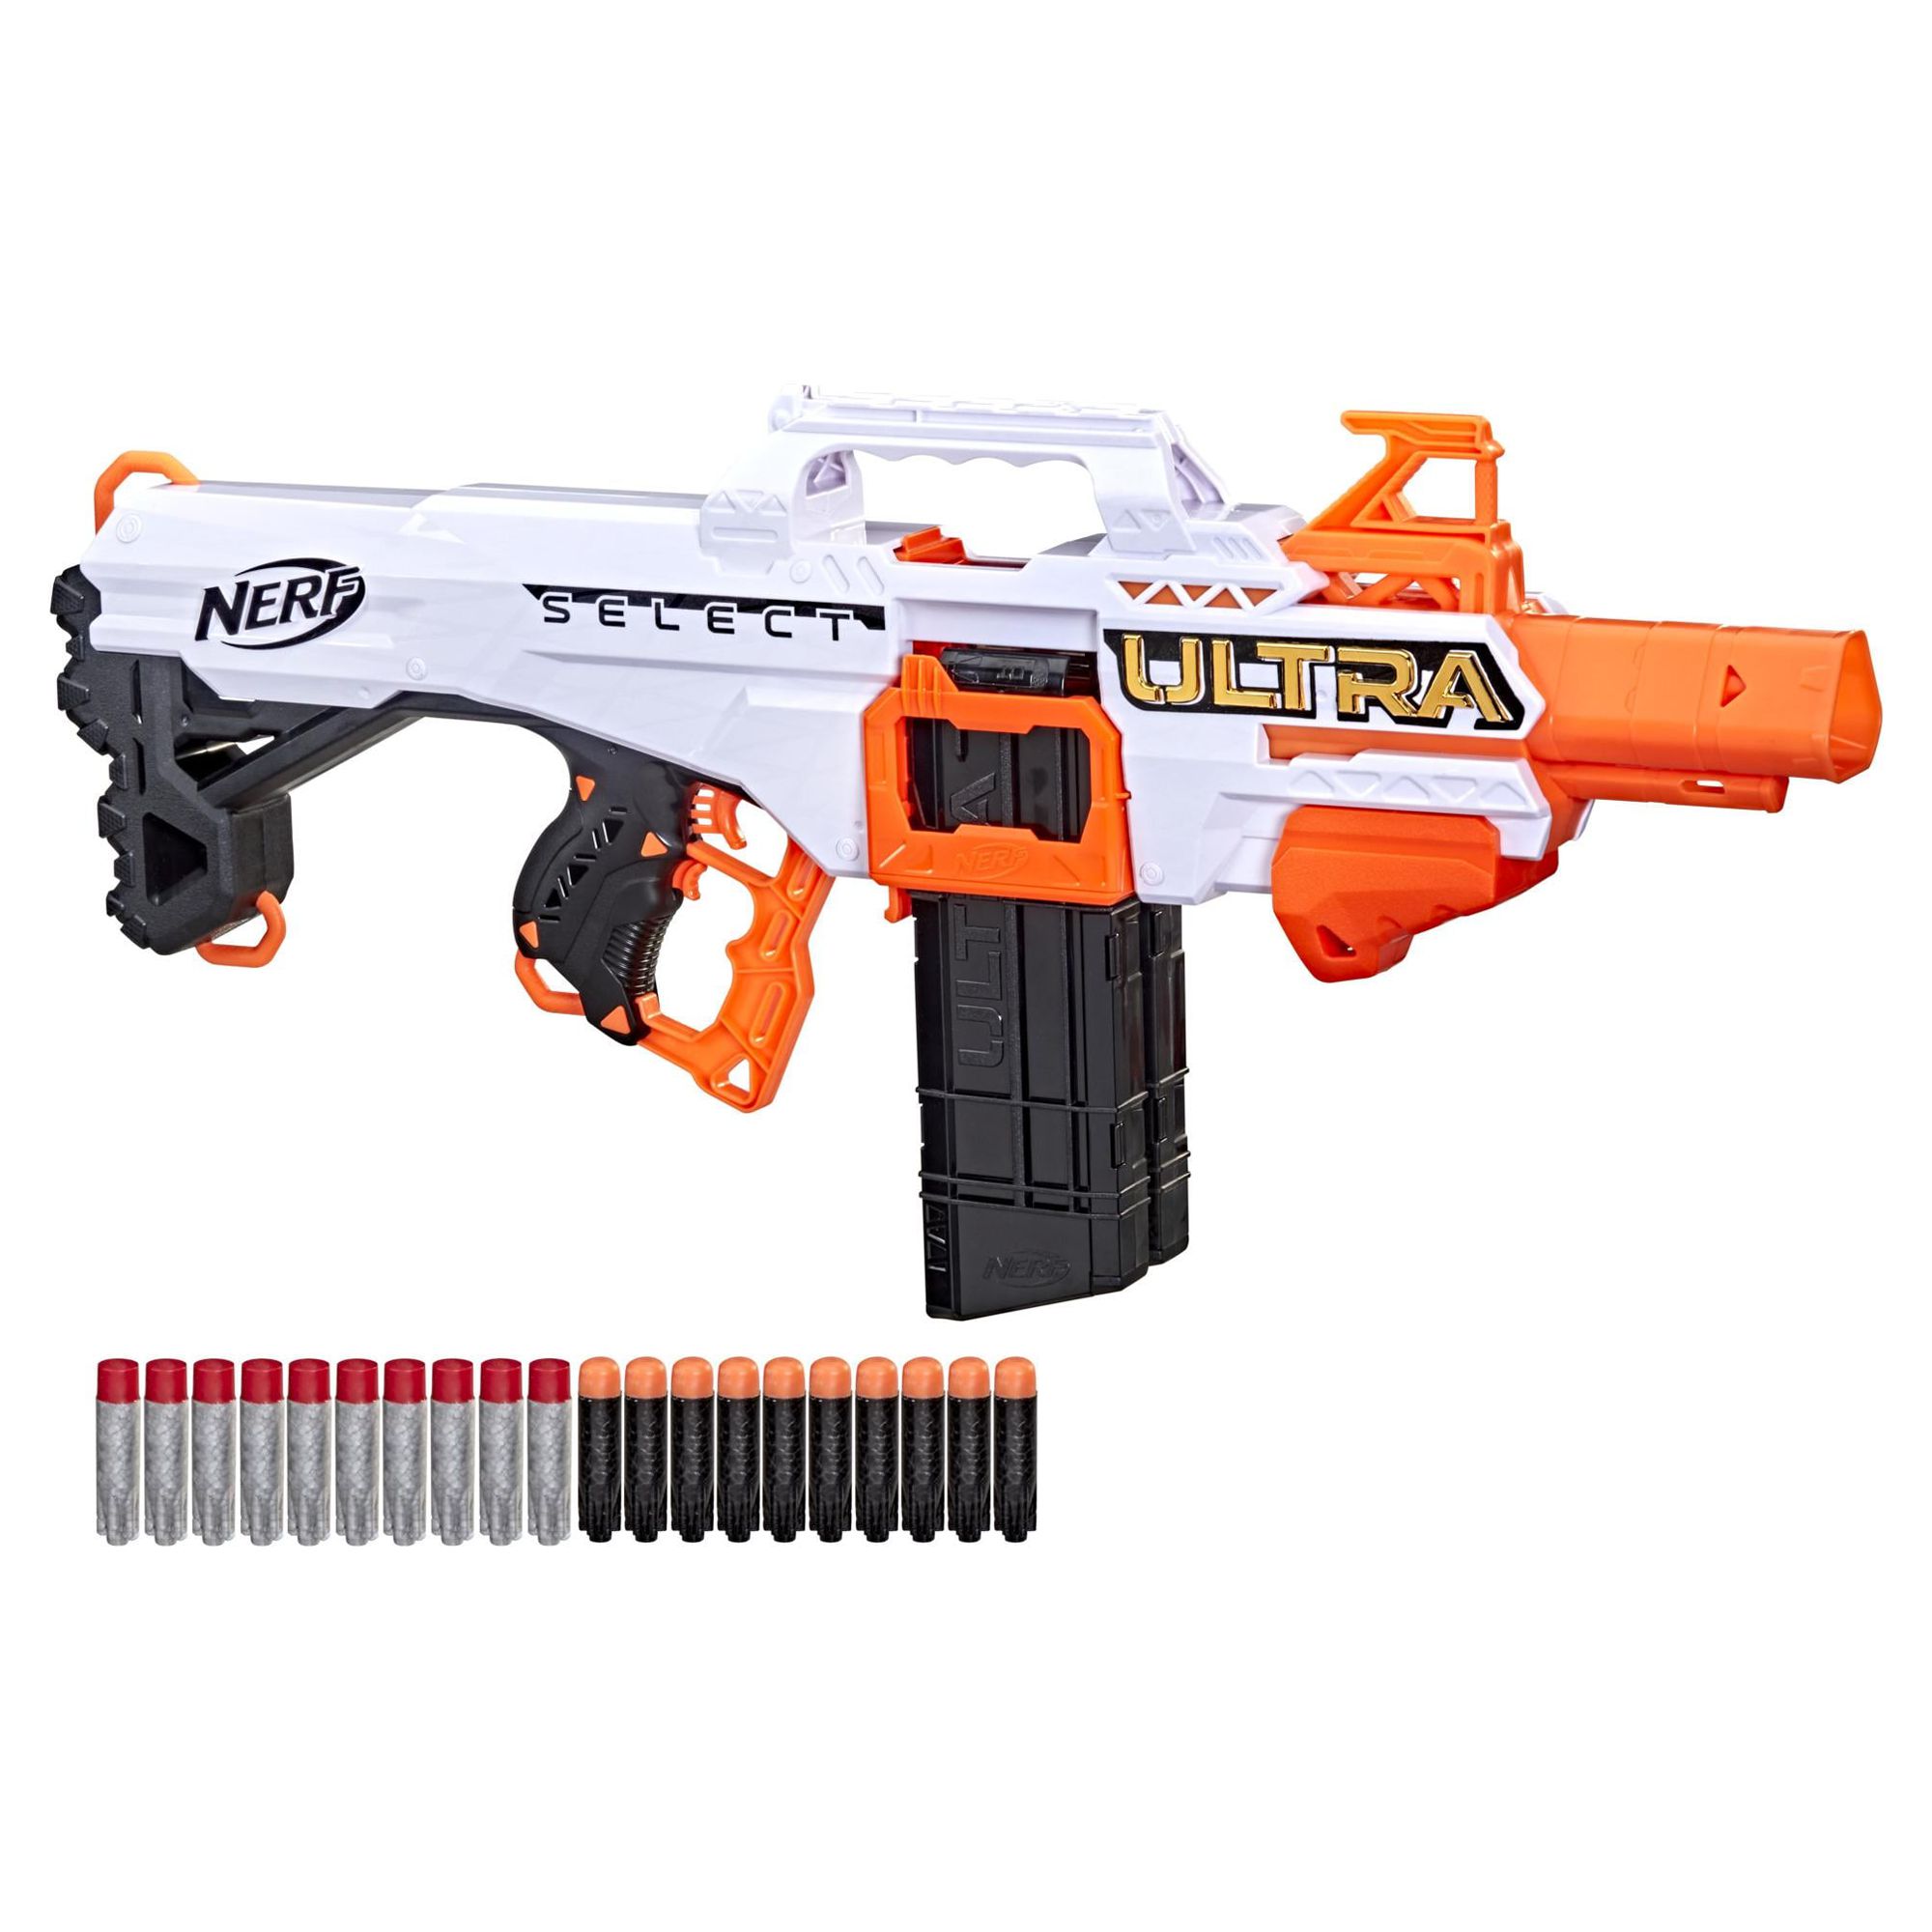 Nerf Ultra Select Fully Motorized Blaster, Fire 2 Ways, Includes Clips and Darts, Compatible Only with Nerf Ultra Darts - image 1 of 5